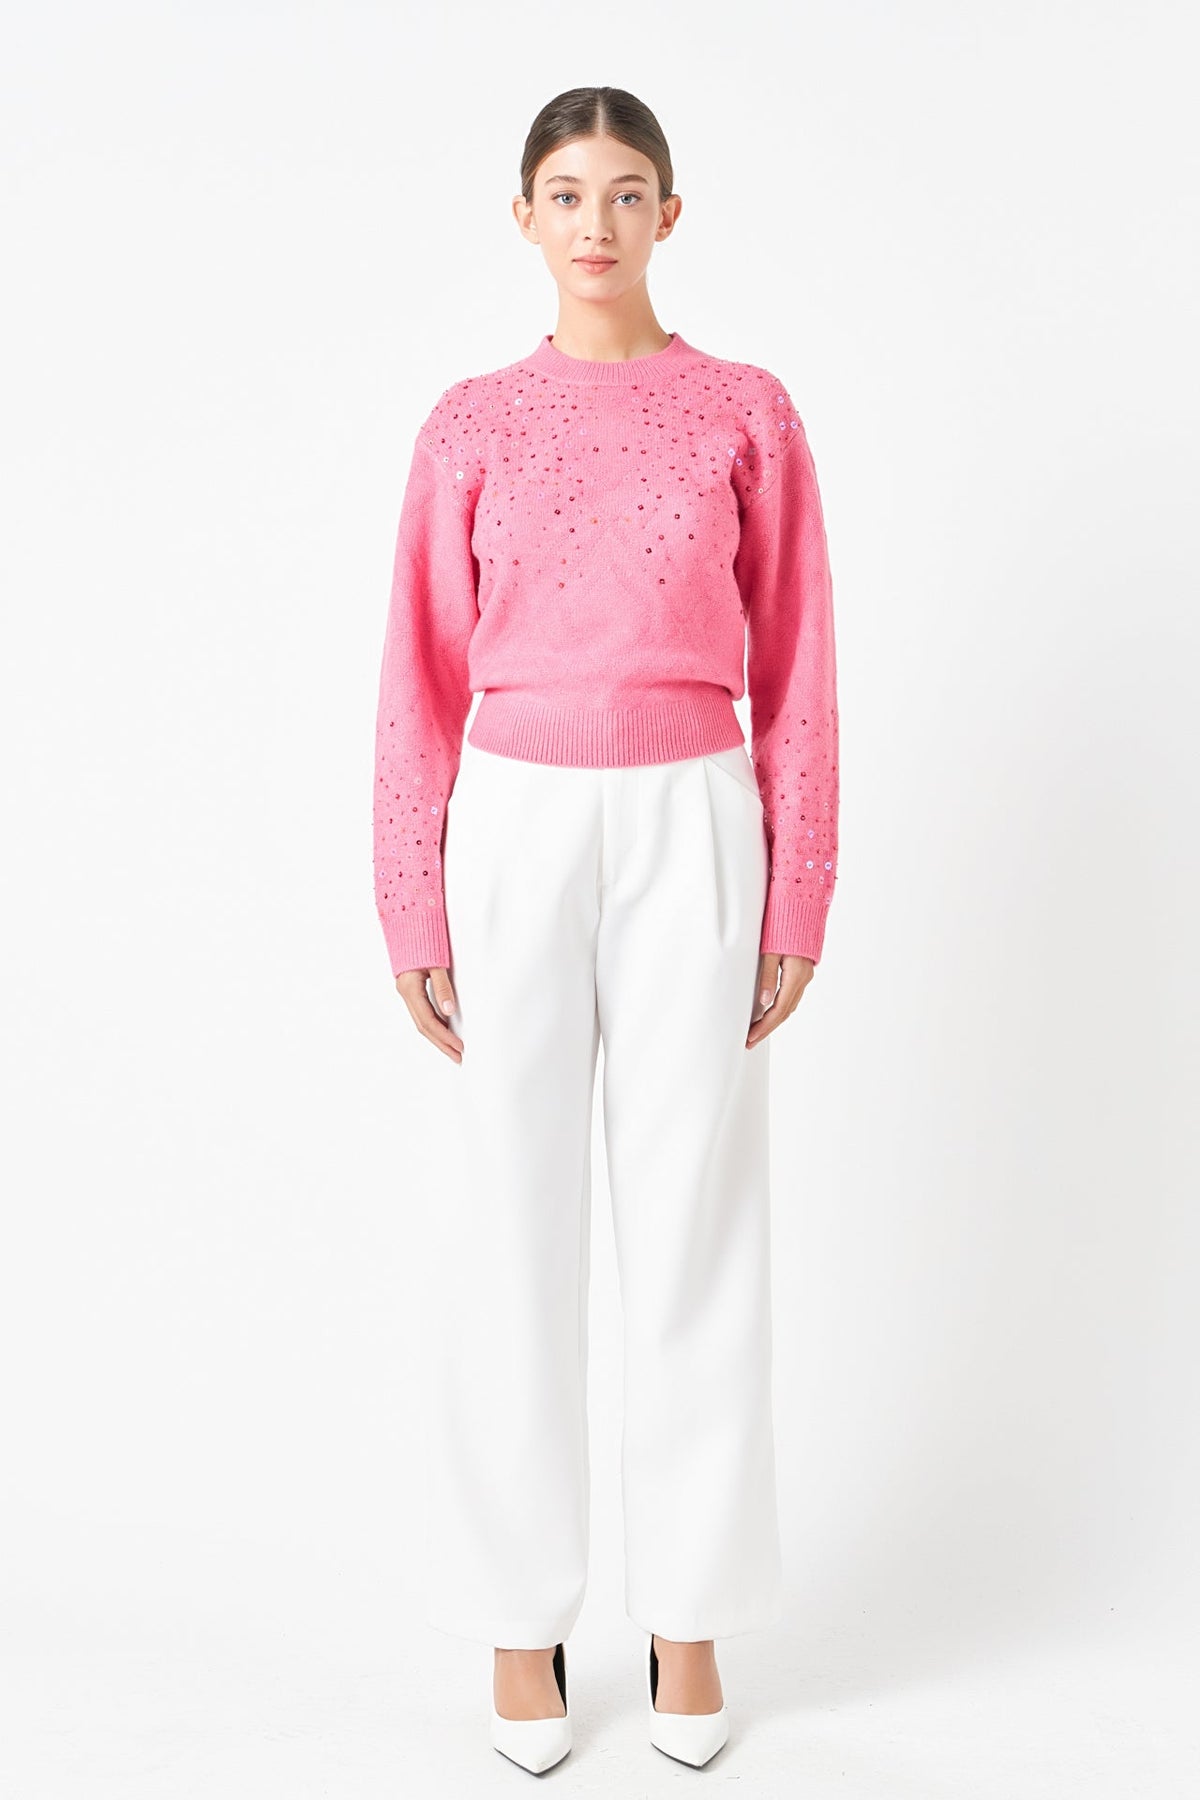 ENDLESS ROSE - Sequins Knit Sweater - SWEATERS & KNITS available at Objectrare